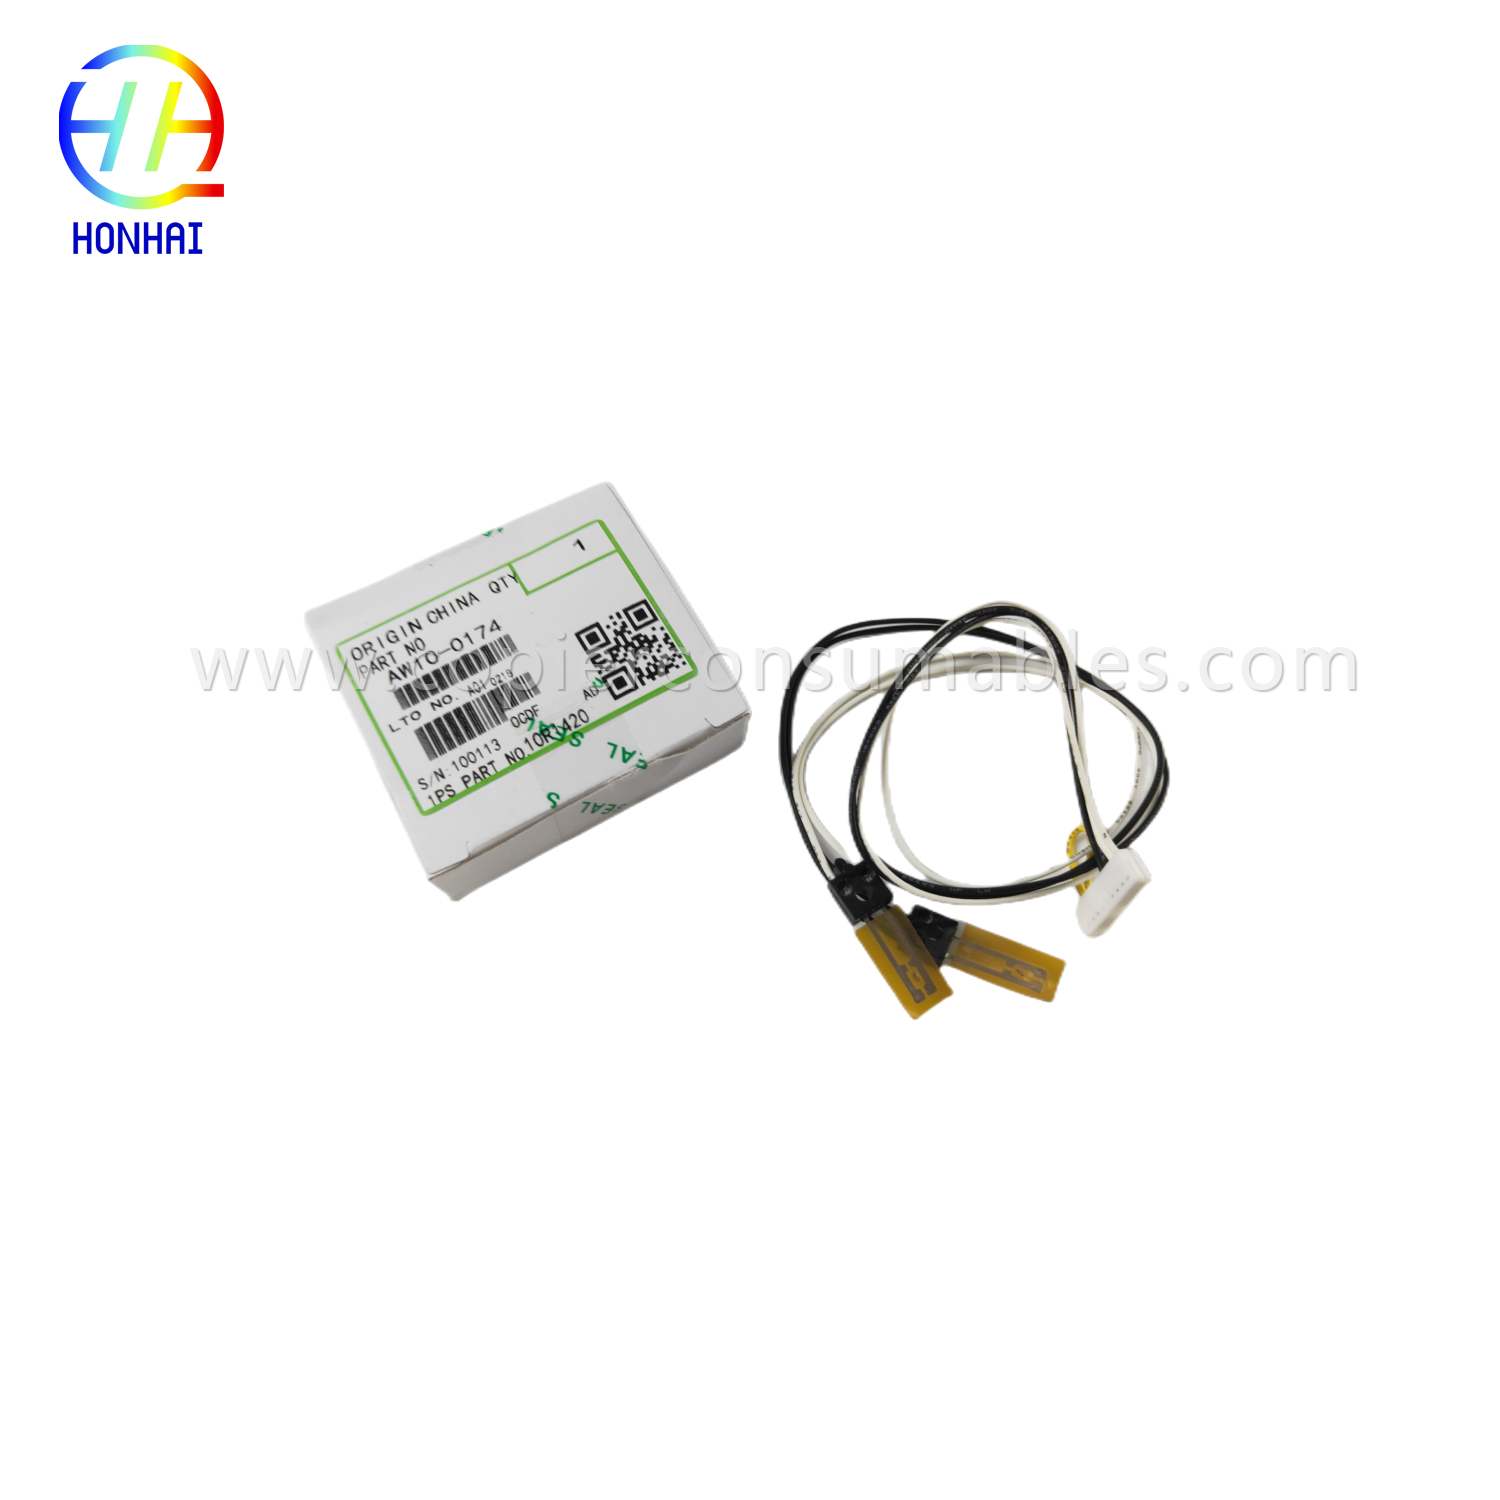 Fuser Thermistor for Ricoh MP3554 2554 3054 4054 5054 6054 AW10 0174